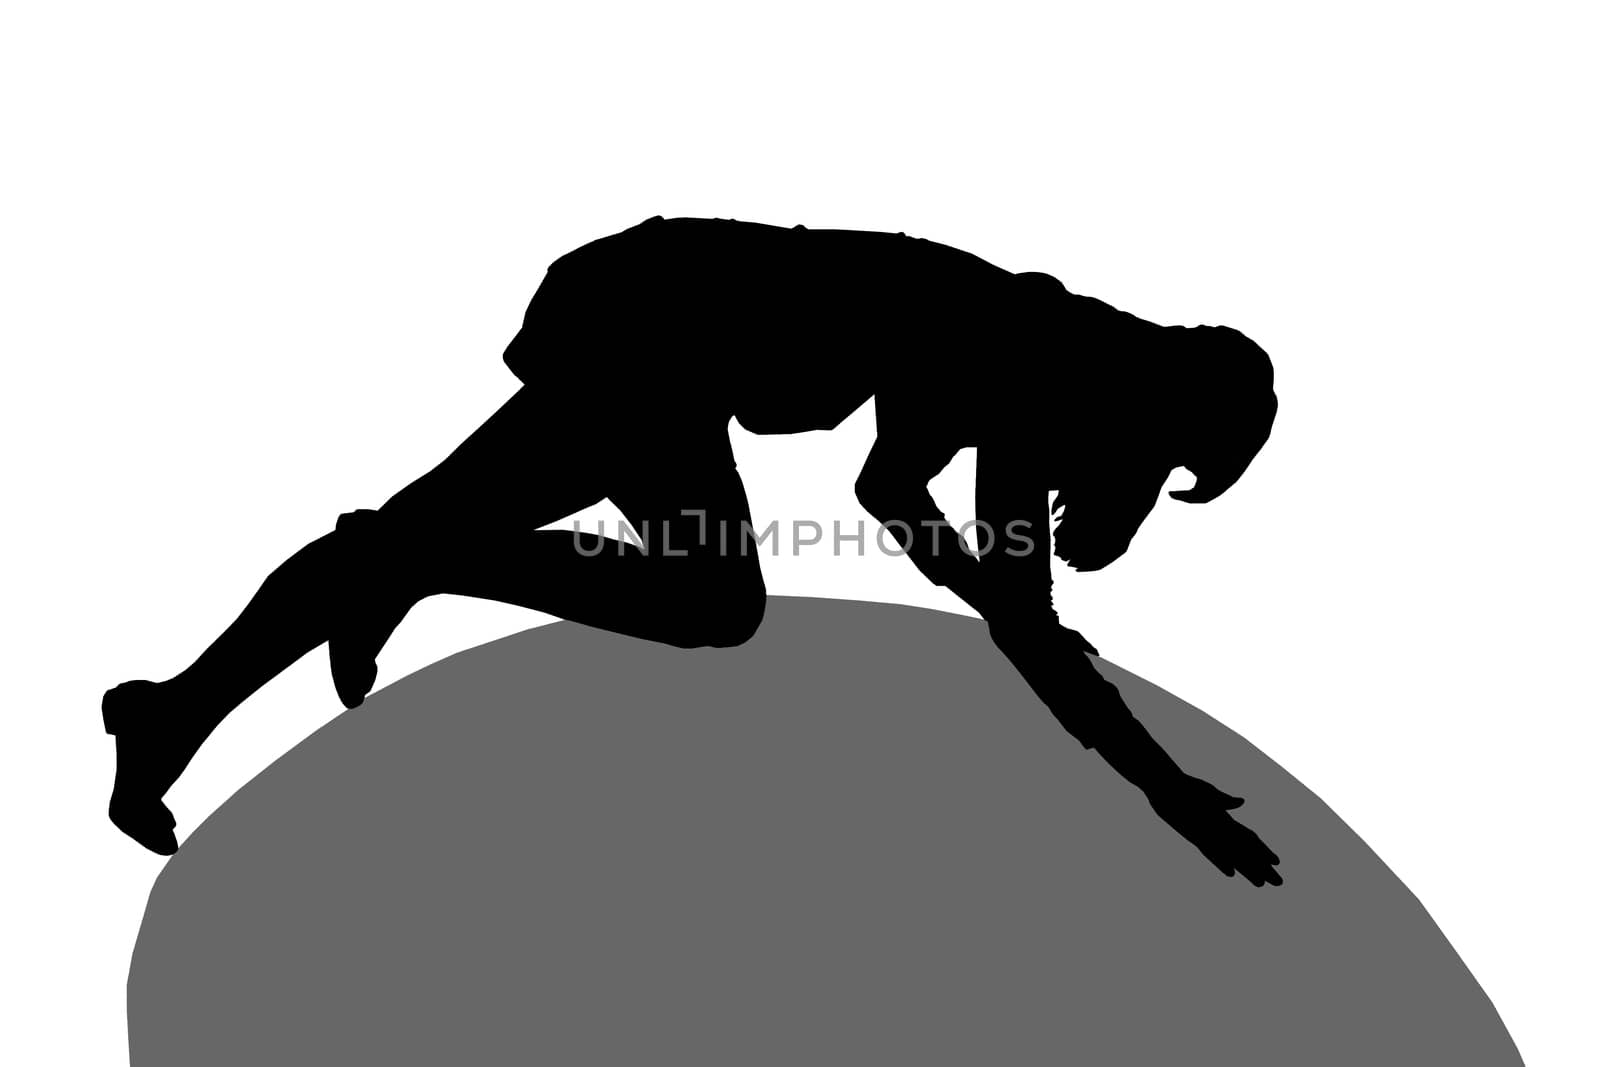 Silhouette of a girl crawling on the ball, isolated on white background.